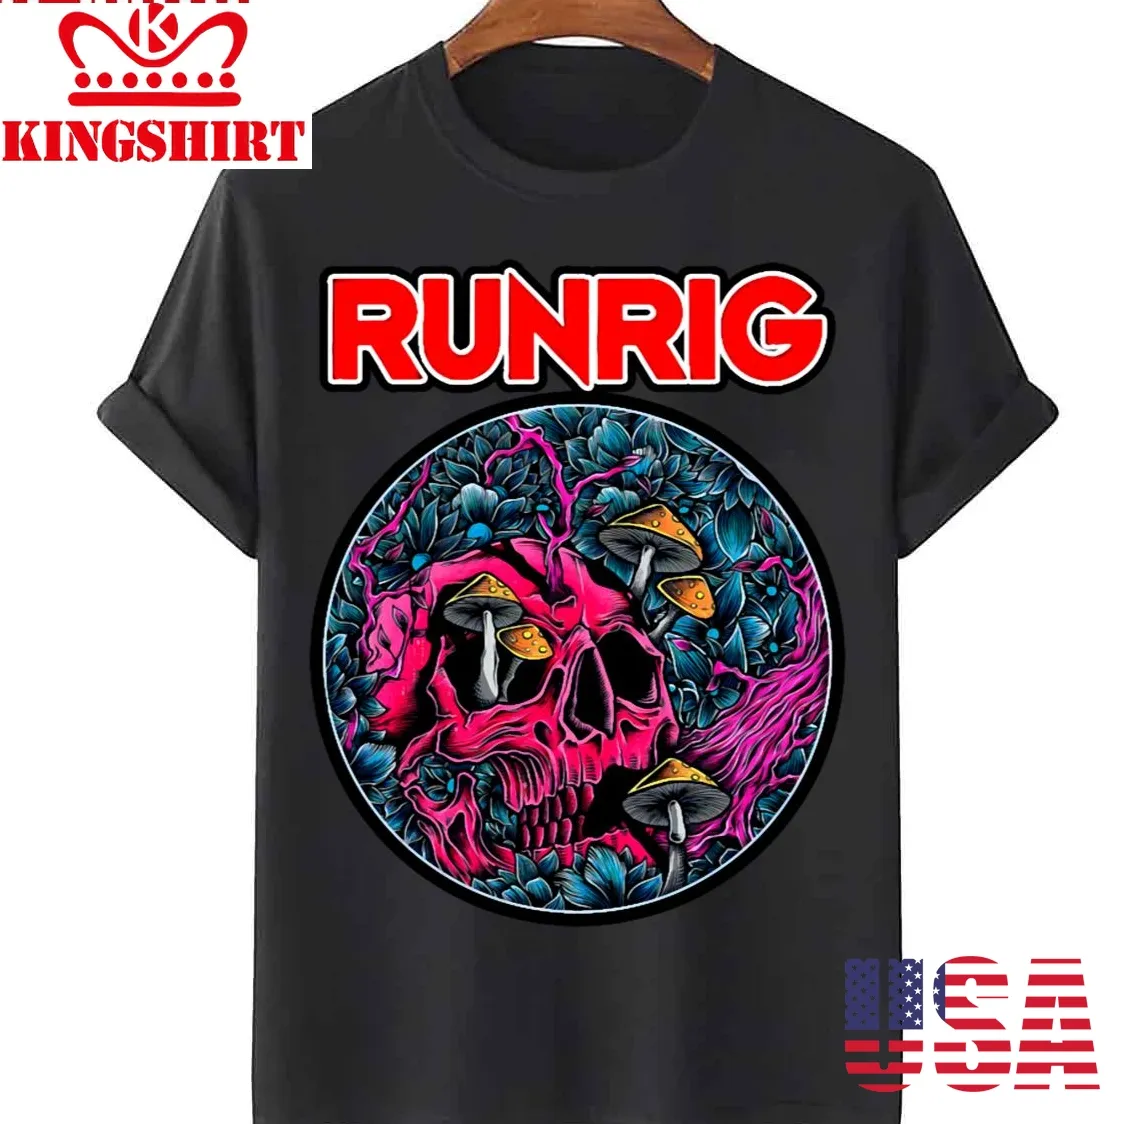 In The Realm Of Creativity Runrig Unisex T Shirt